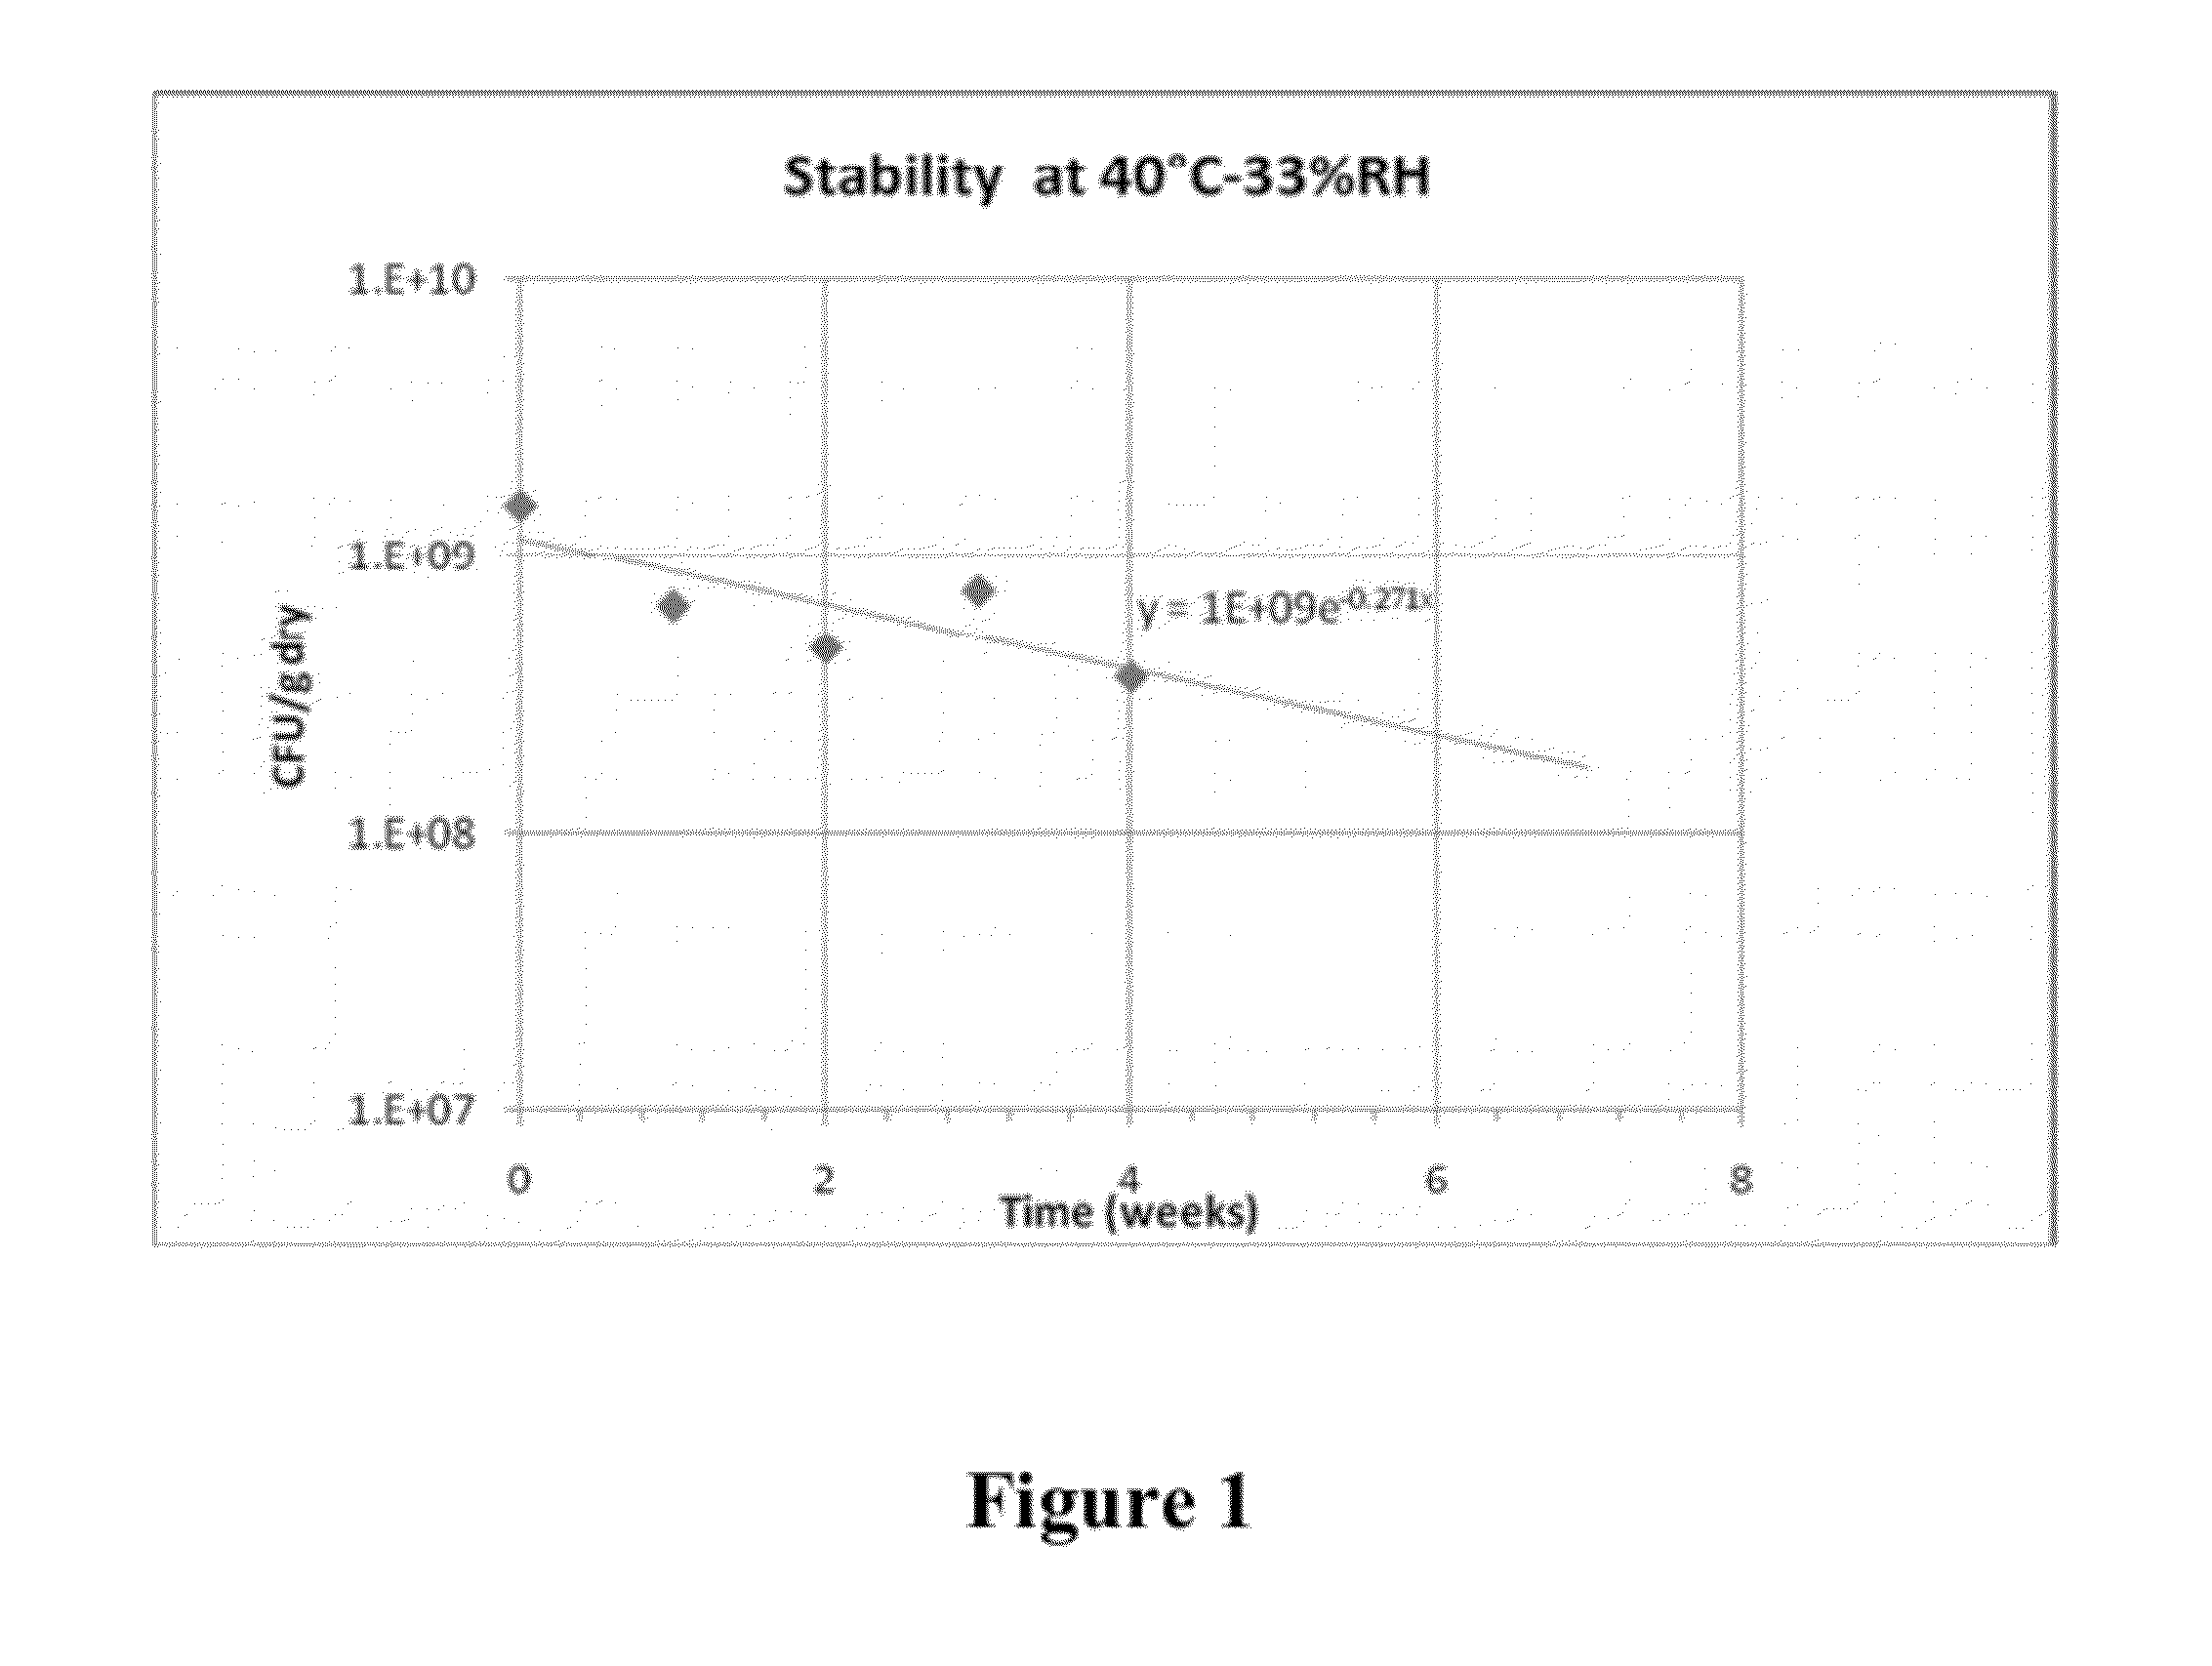 Stable dry powder composition comprising biologically active microorganisms and/or bioactive materials and methods of making